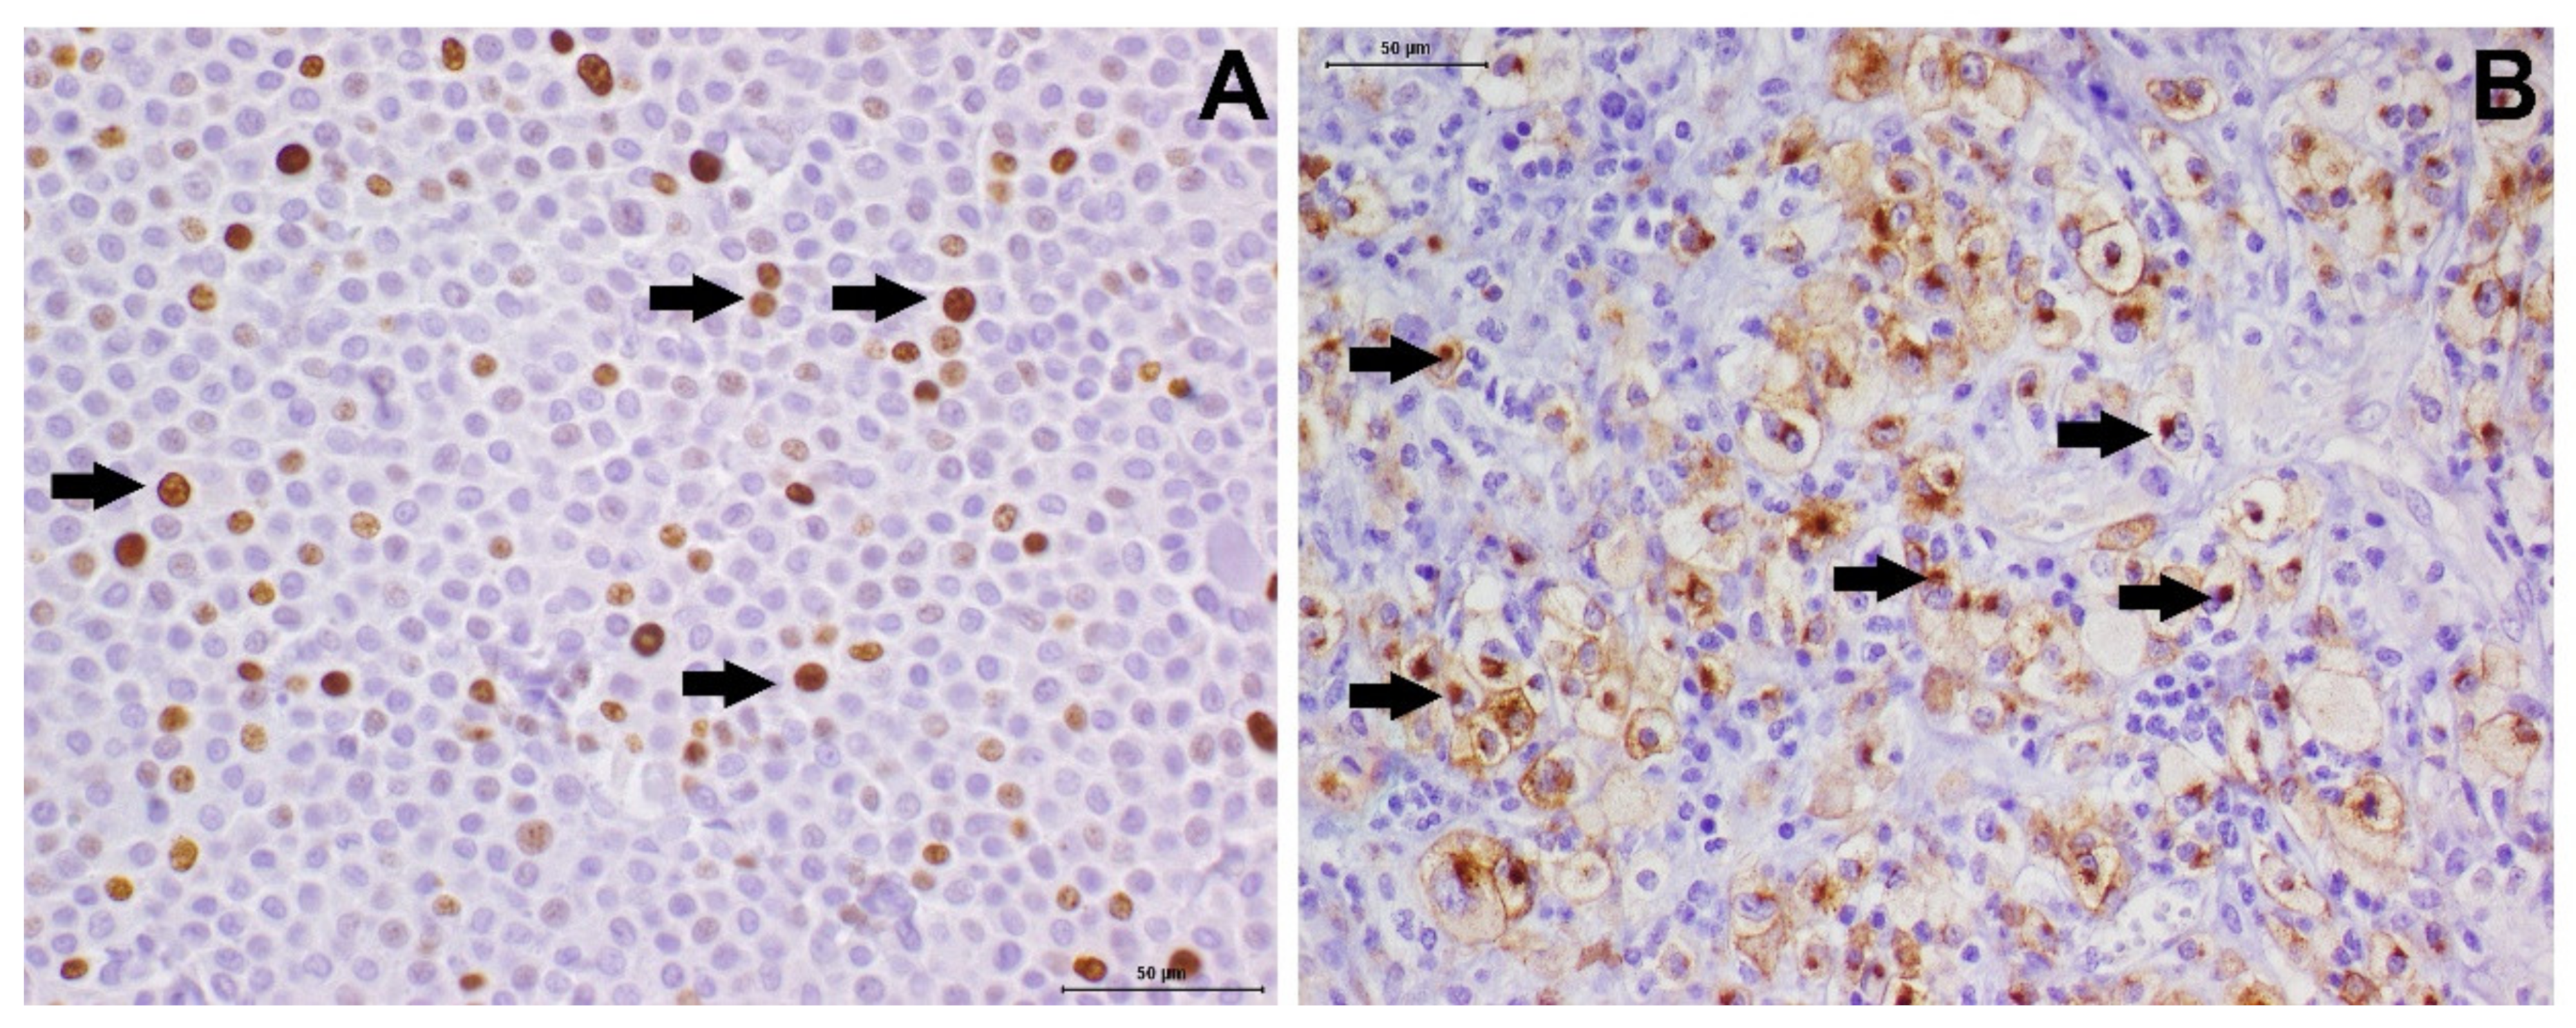 Cells | Free Full-Text | Diagnosis, Prognosis and Treatment of Canine  Cutaneous and Subcutaneous Mast Cell Tumors | HTML